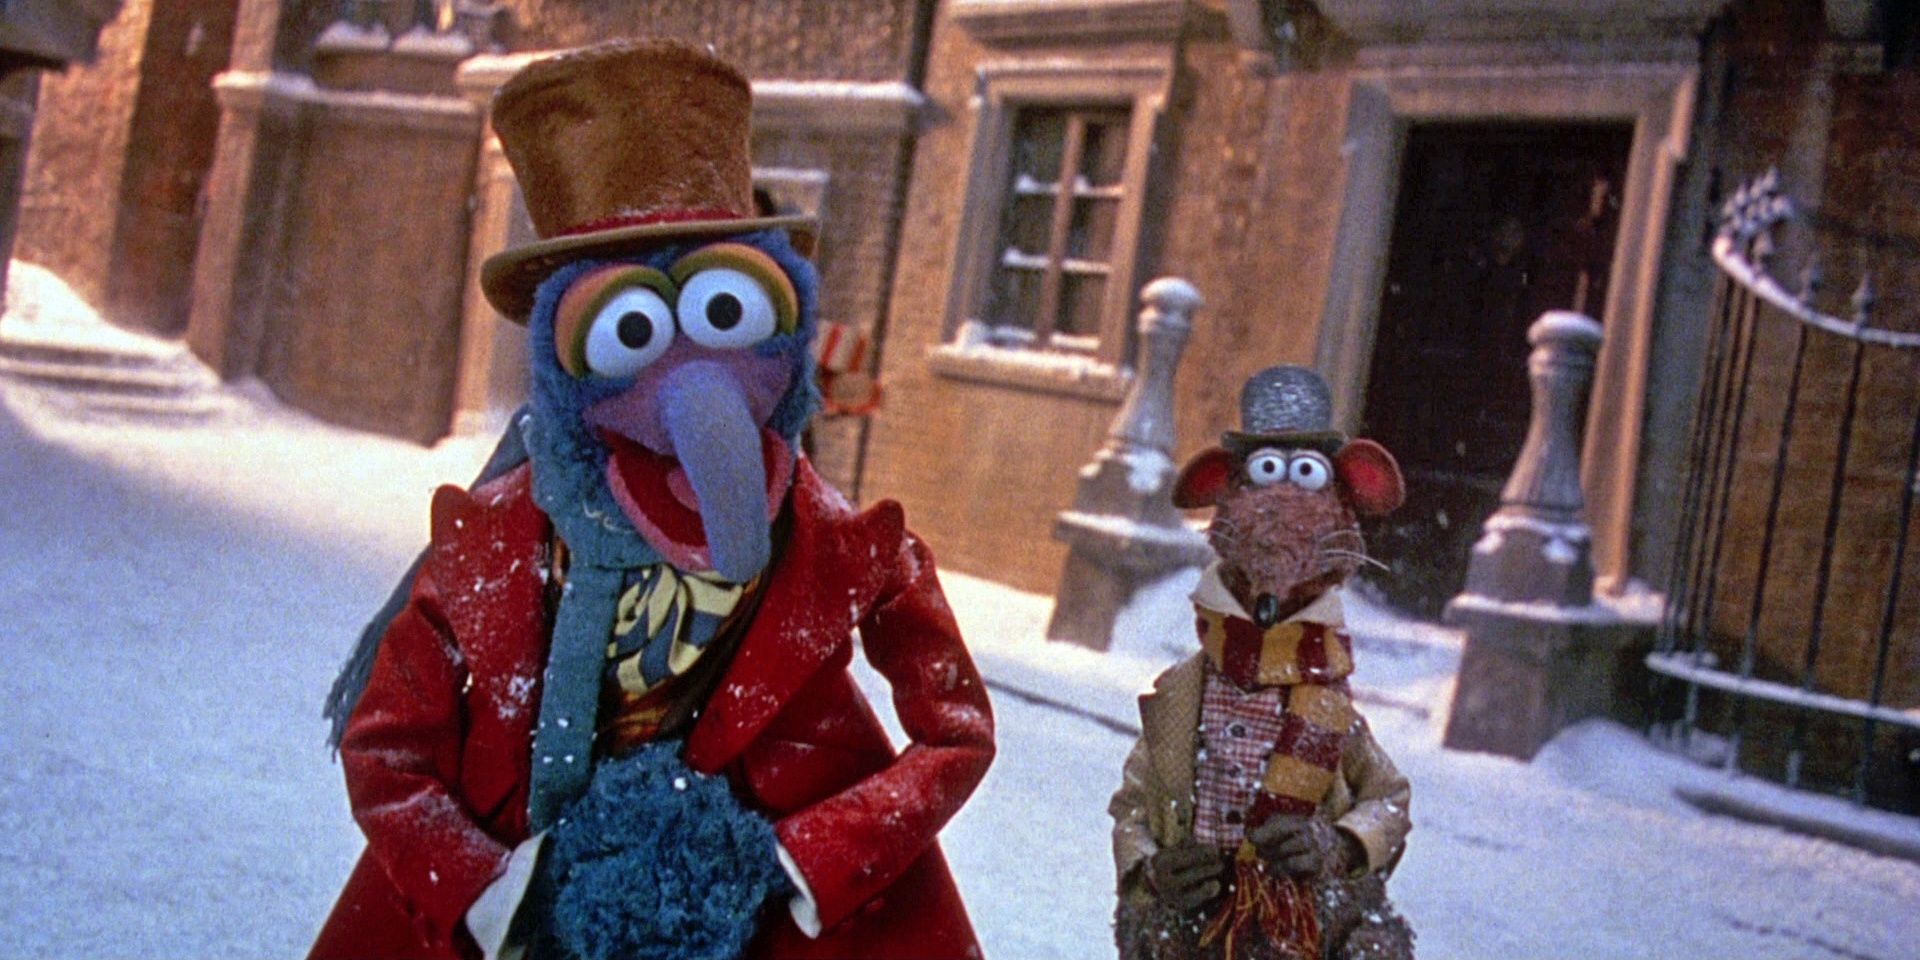 Gonzo and Rizzo walk on a snow-covered street in The Muppet Christmas Carol